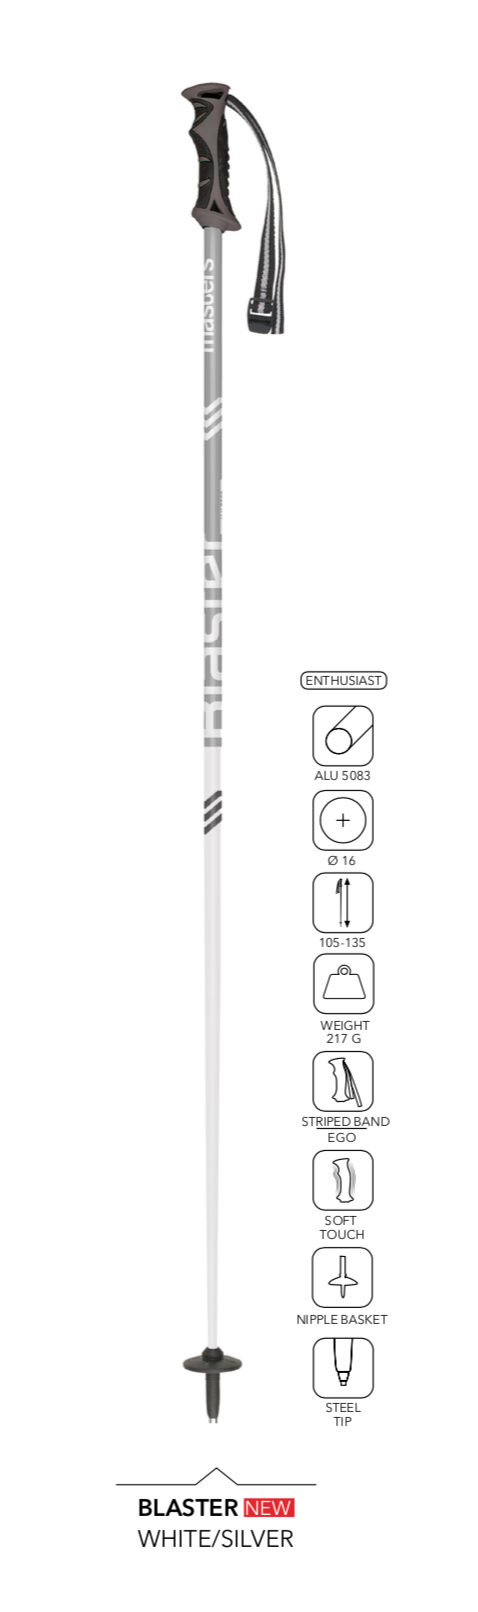 Blaster All-Mtn ski poles by Masters (2 colors) on World Cup Ski Shop 1